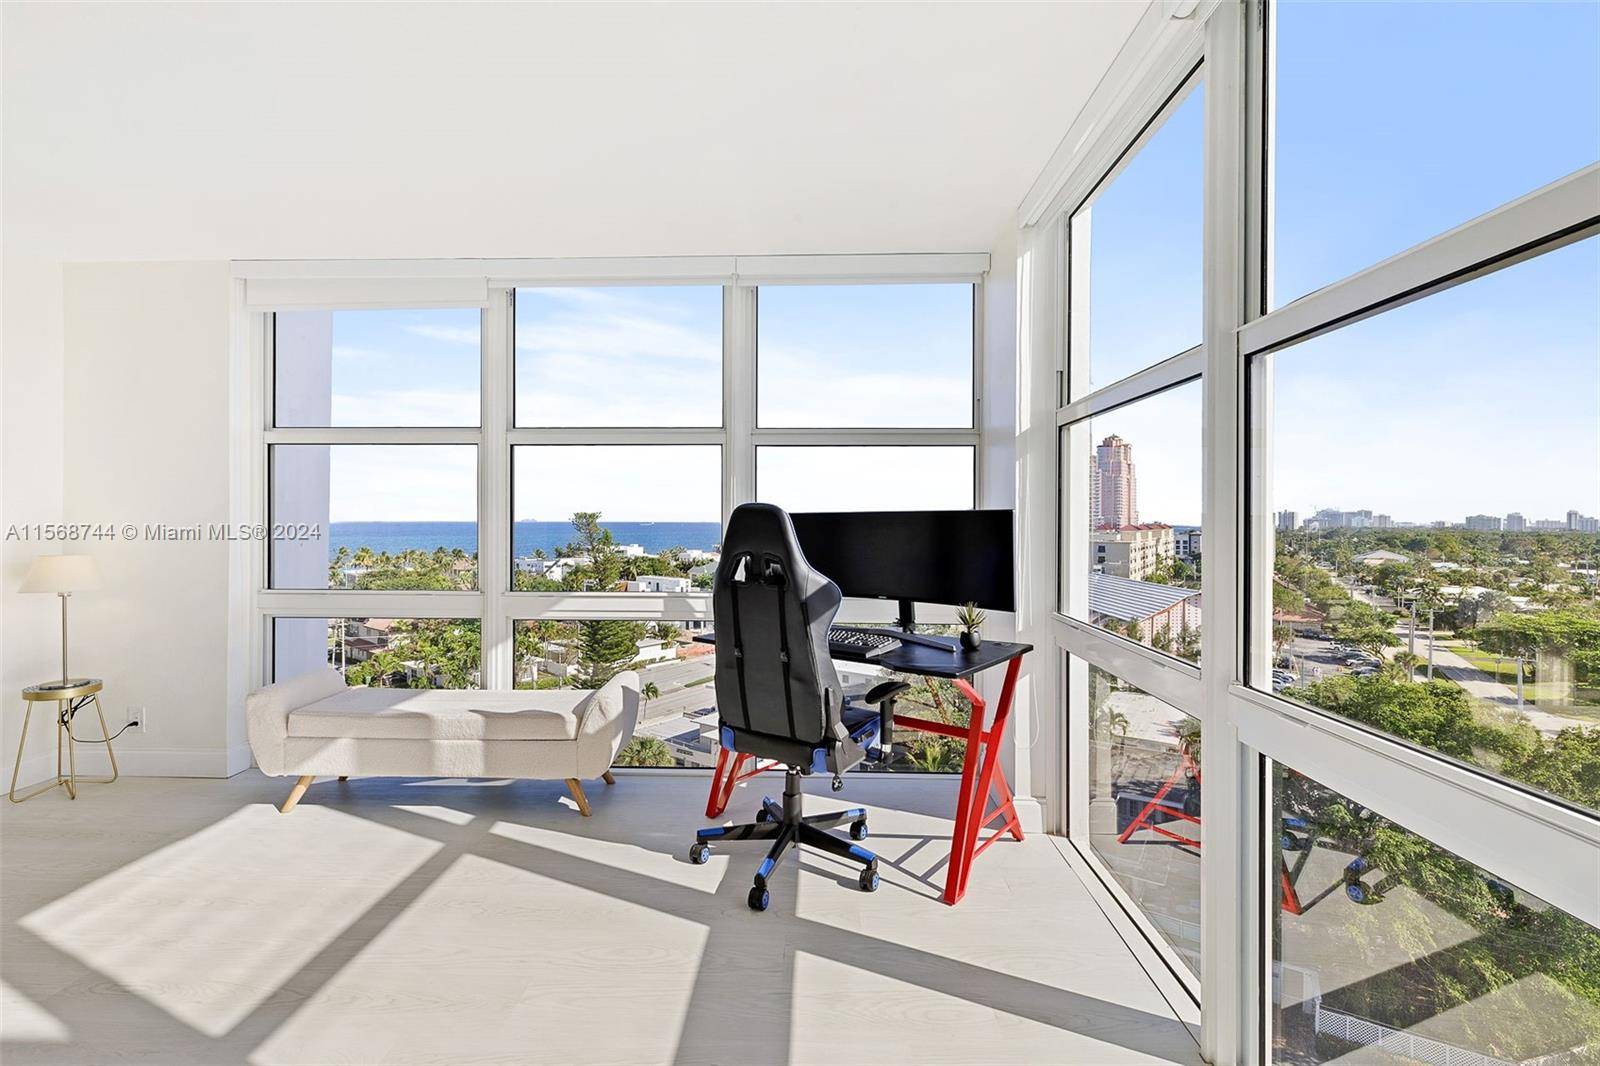 Experience the resort style living at Embassy Tower with this 2 bedroom, 2 bathroom end unit which boasts breathtaking views of the ocean, the Intracoastal Waterway, sunrise and sunset, and ...